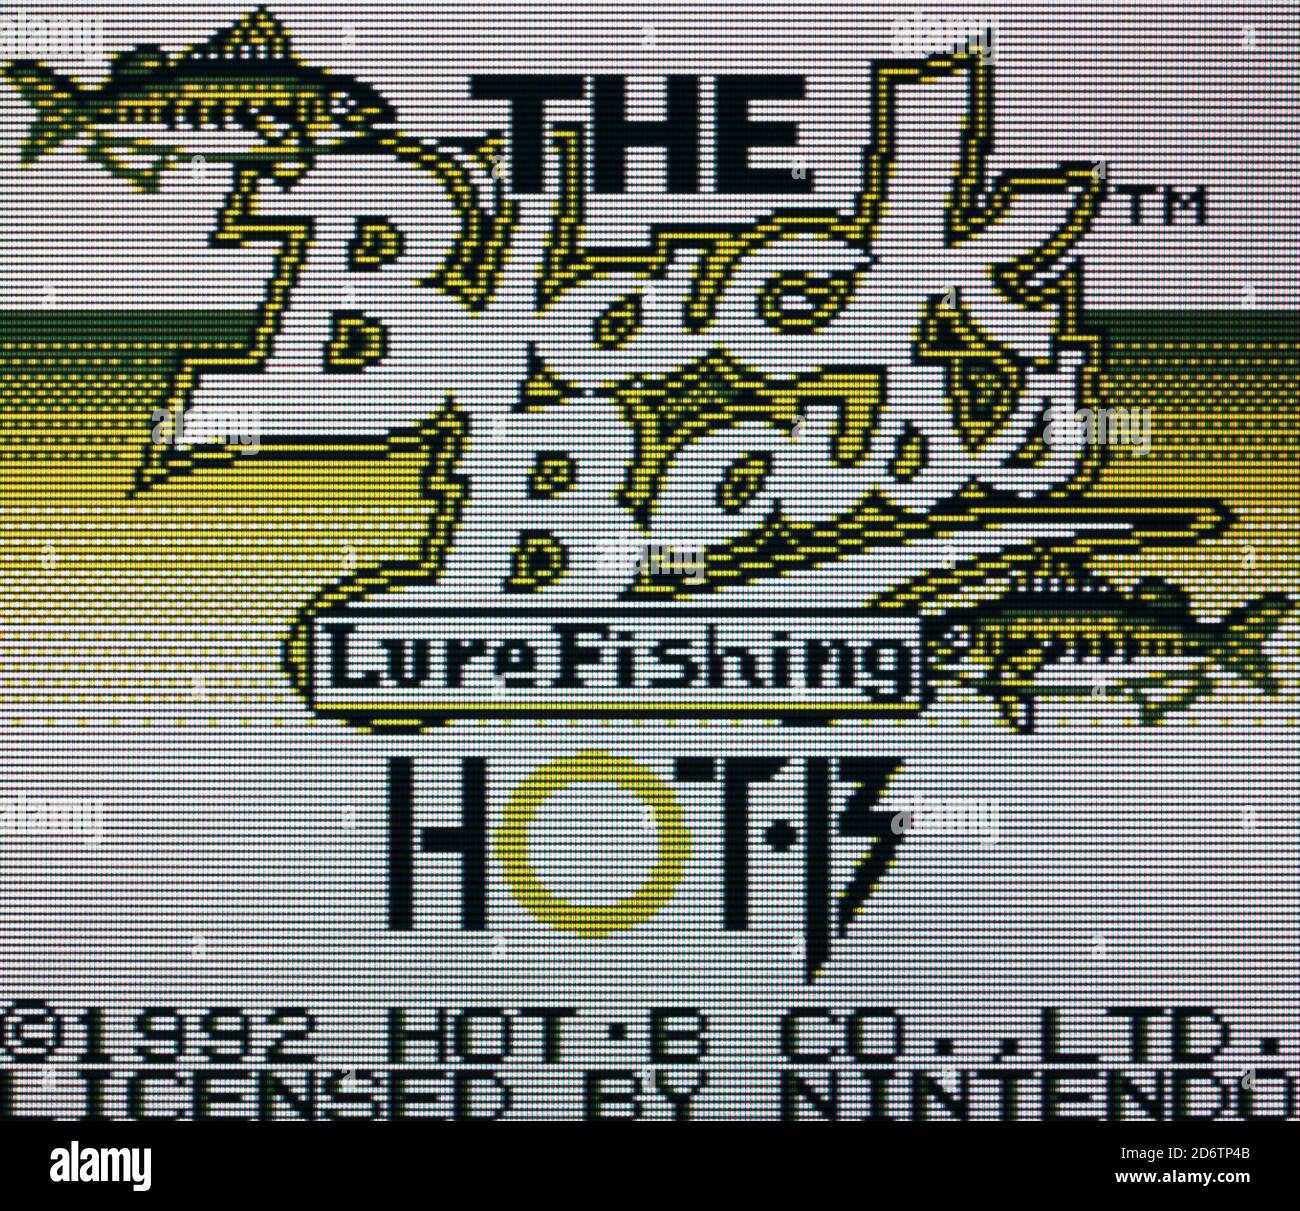 The Black Bass Lure Fishing - Nintendo Gameboy Videogame - Editorial use  only Stock Photo - Alamy